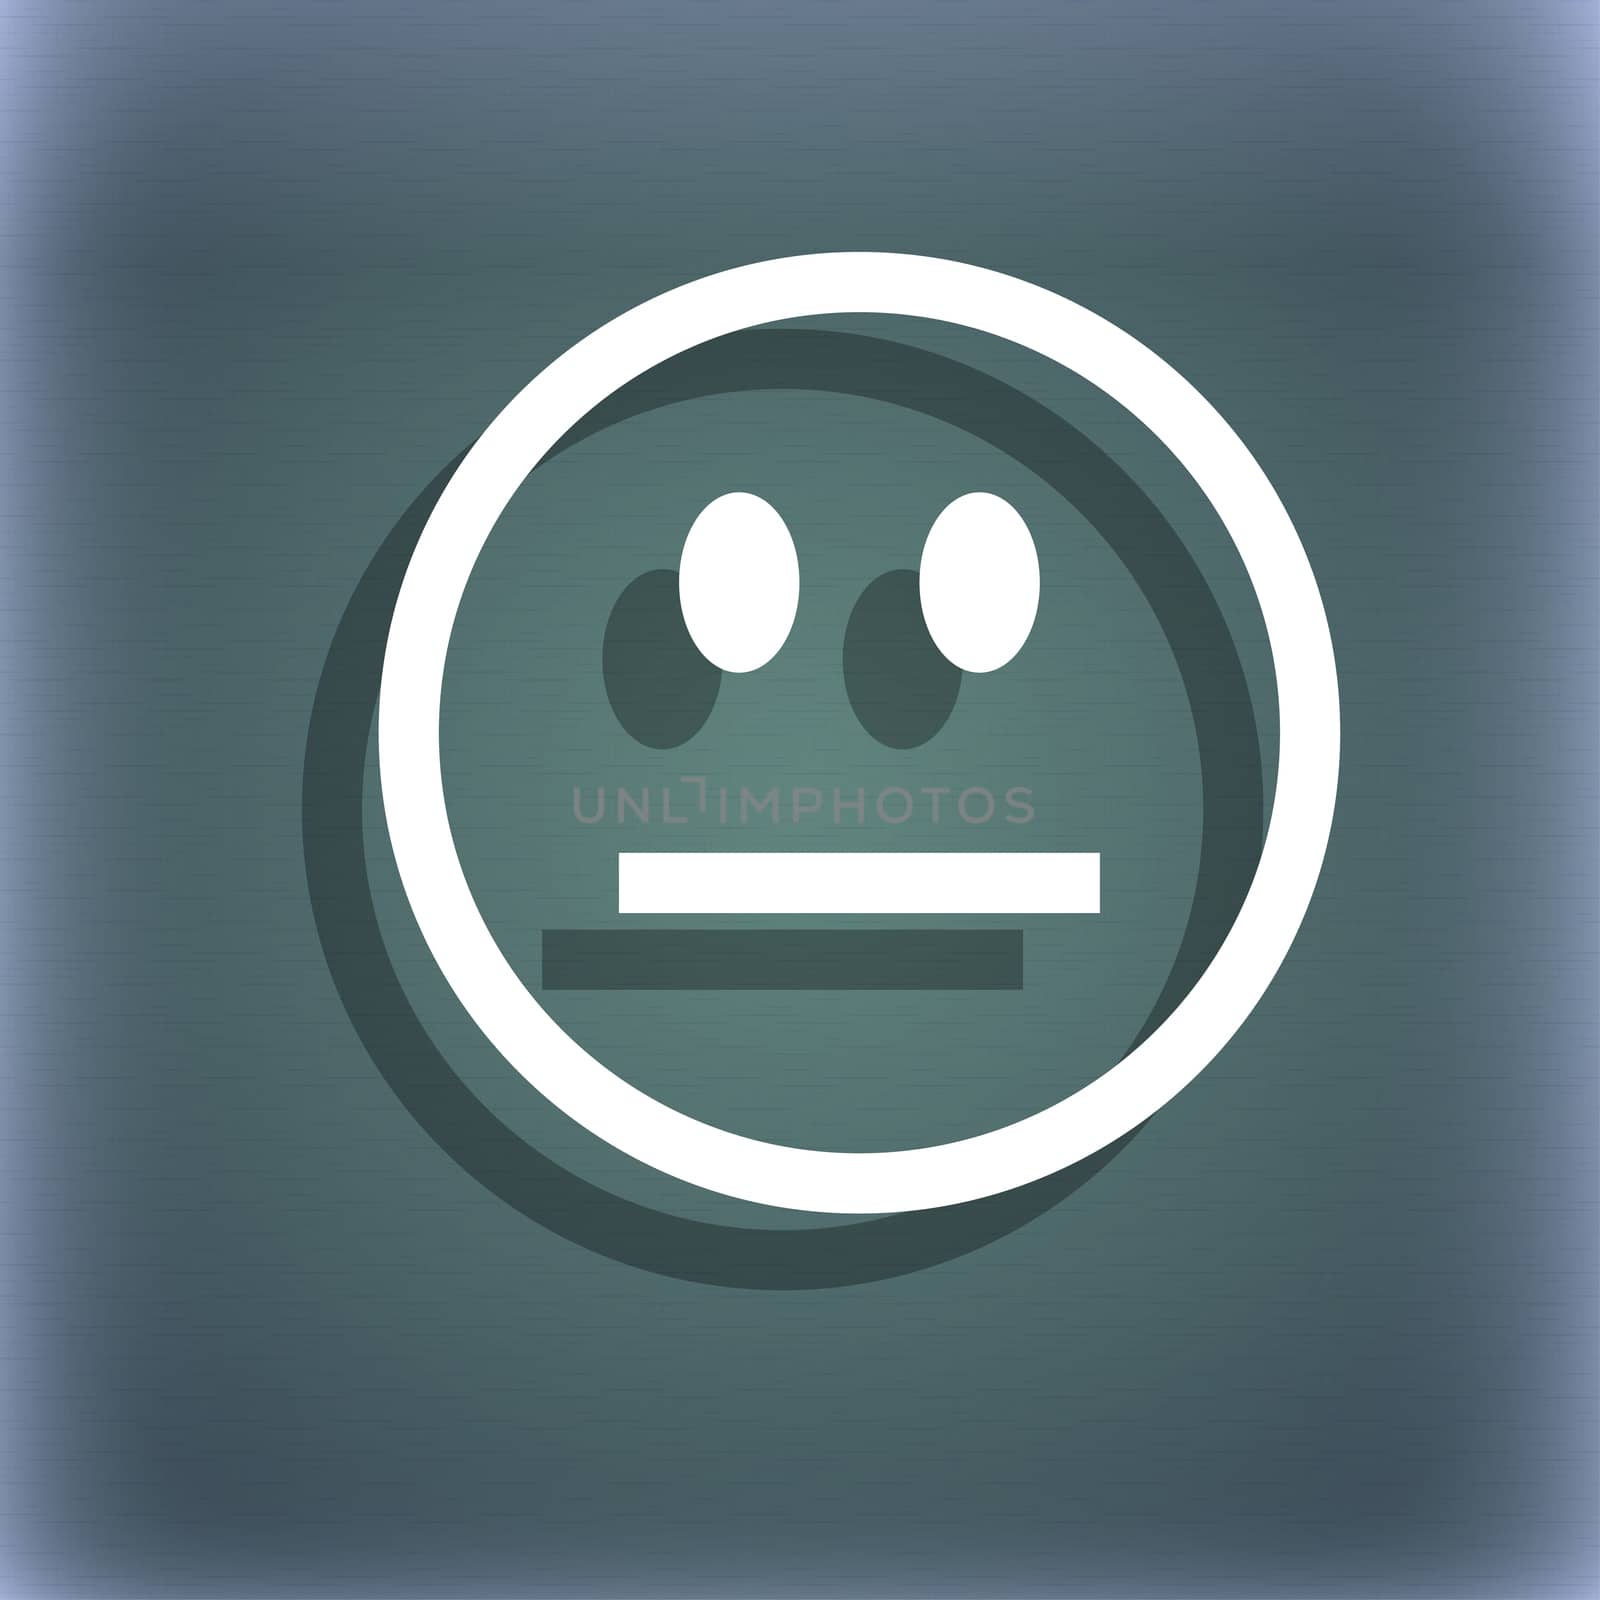 Sad face, Sadness depression icon symbol on the blue-green abstract background with shadow and space for your text. illustration